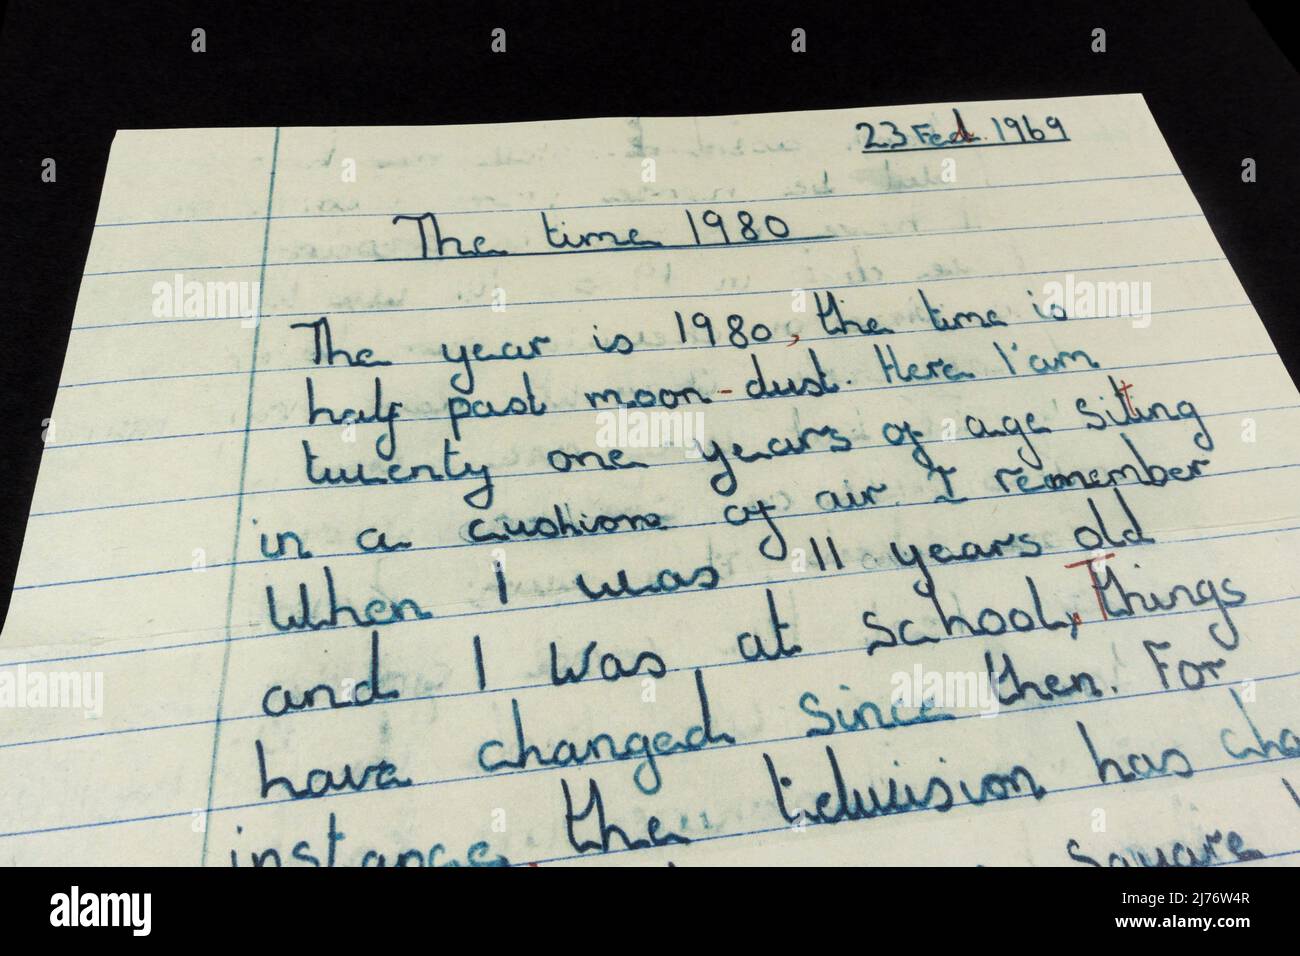 An essay 'The time 1980' by a primary school child looking into the technology in the future (written in 1969), 1960's themed replica memorabilia. Stock Photo